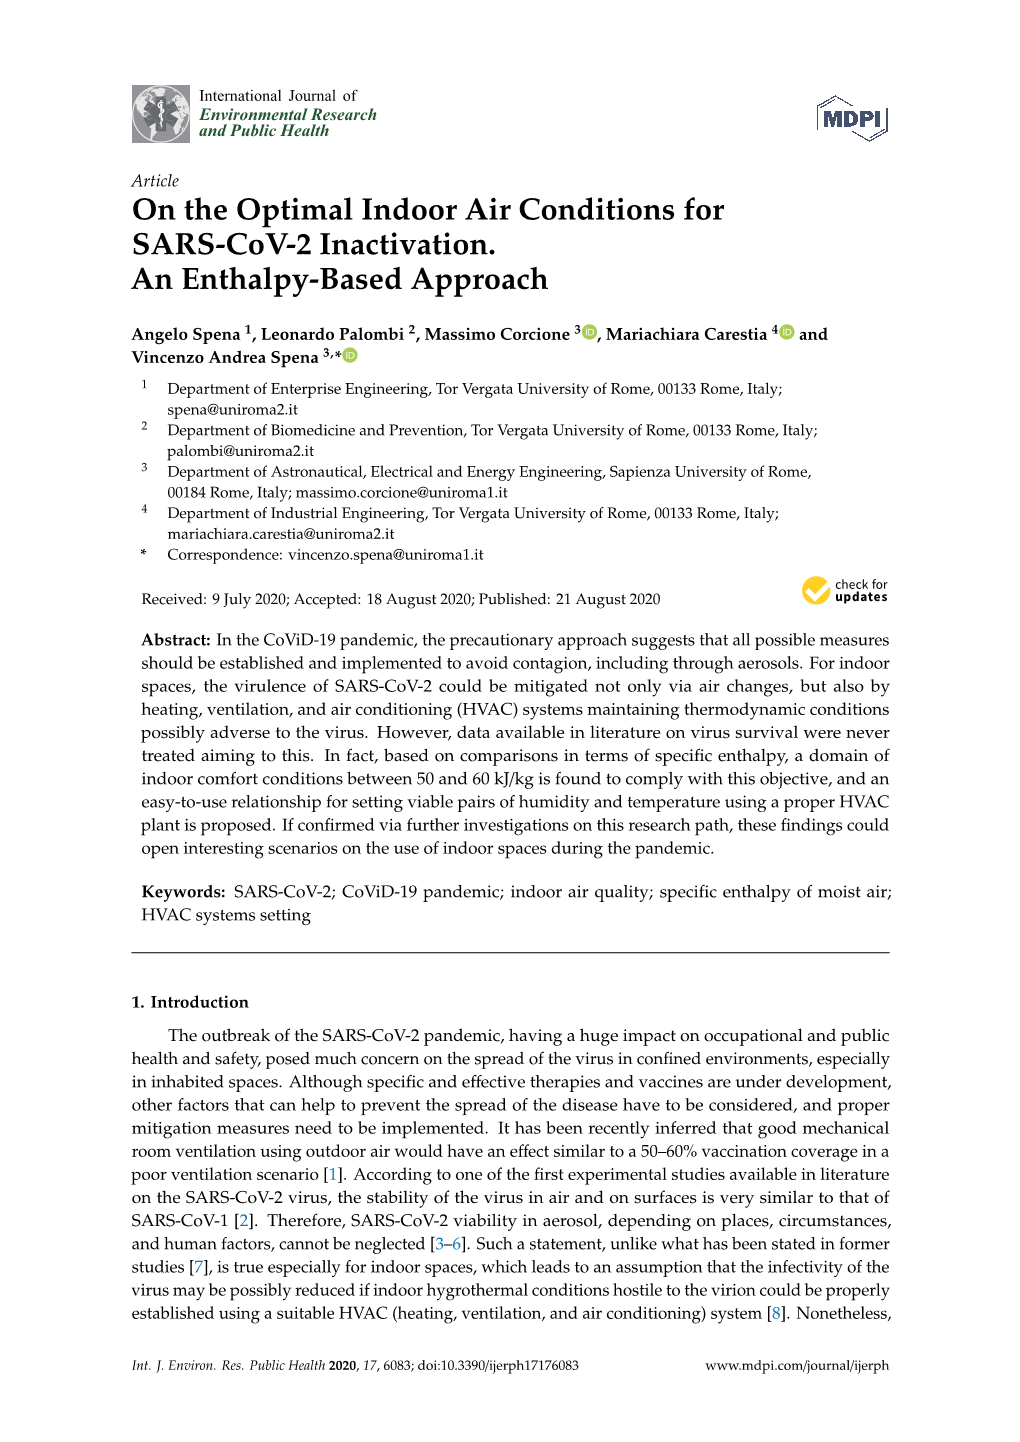 On the Optimal Indoor Air Conditions for SARS-Cov-2 Inactivation. an Enthalpy-Based Approach